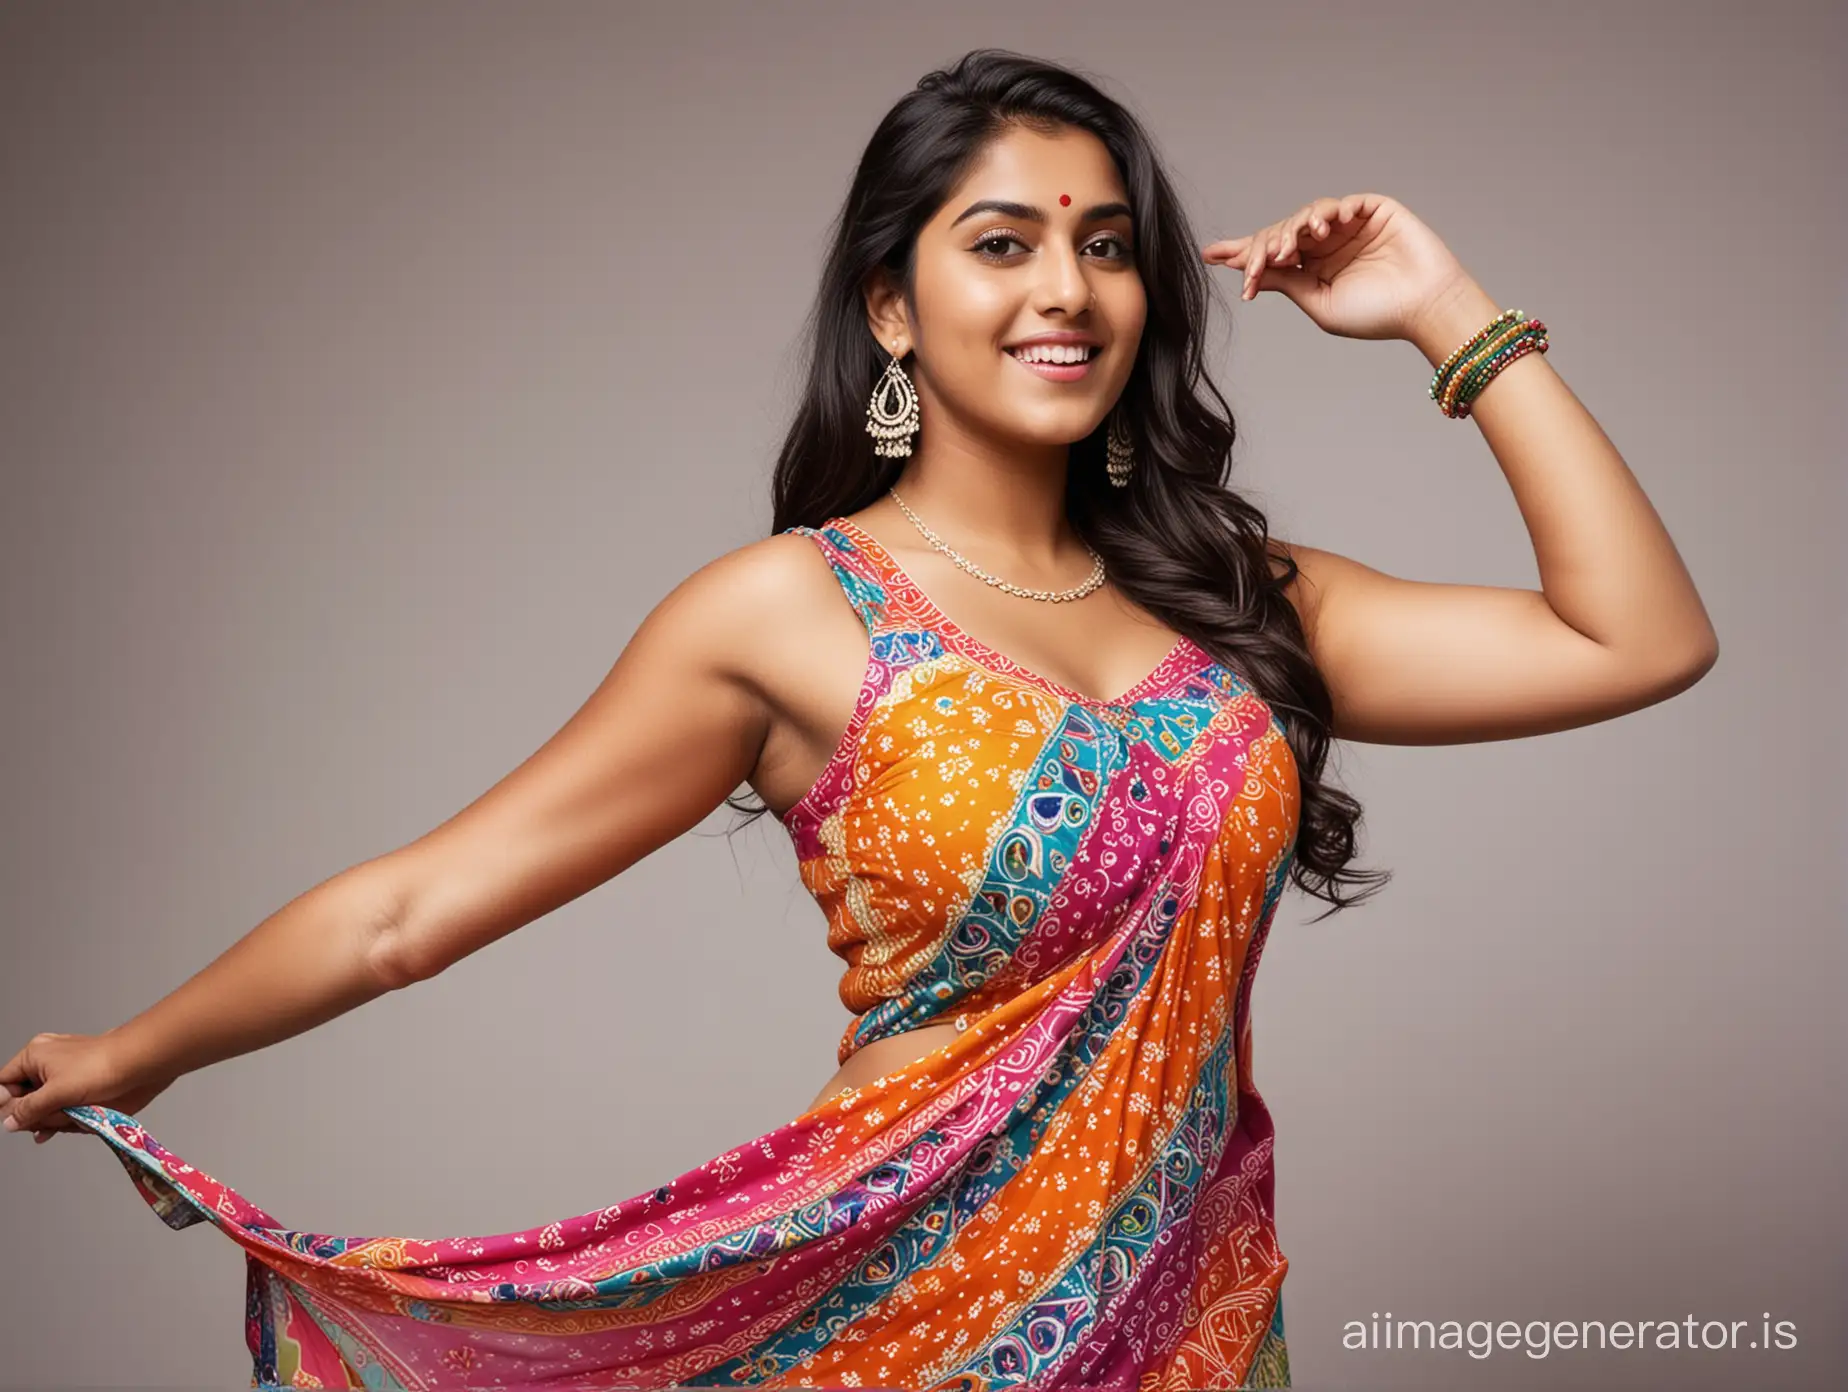 Vibrant-Indian-Dress-Playful-Woman-in-Colorful-Attire